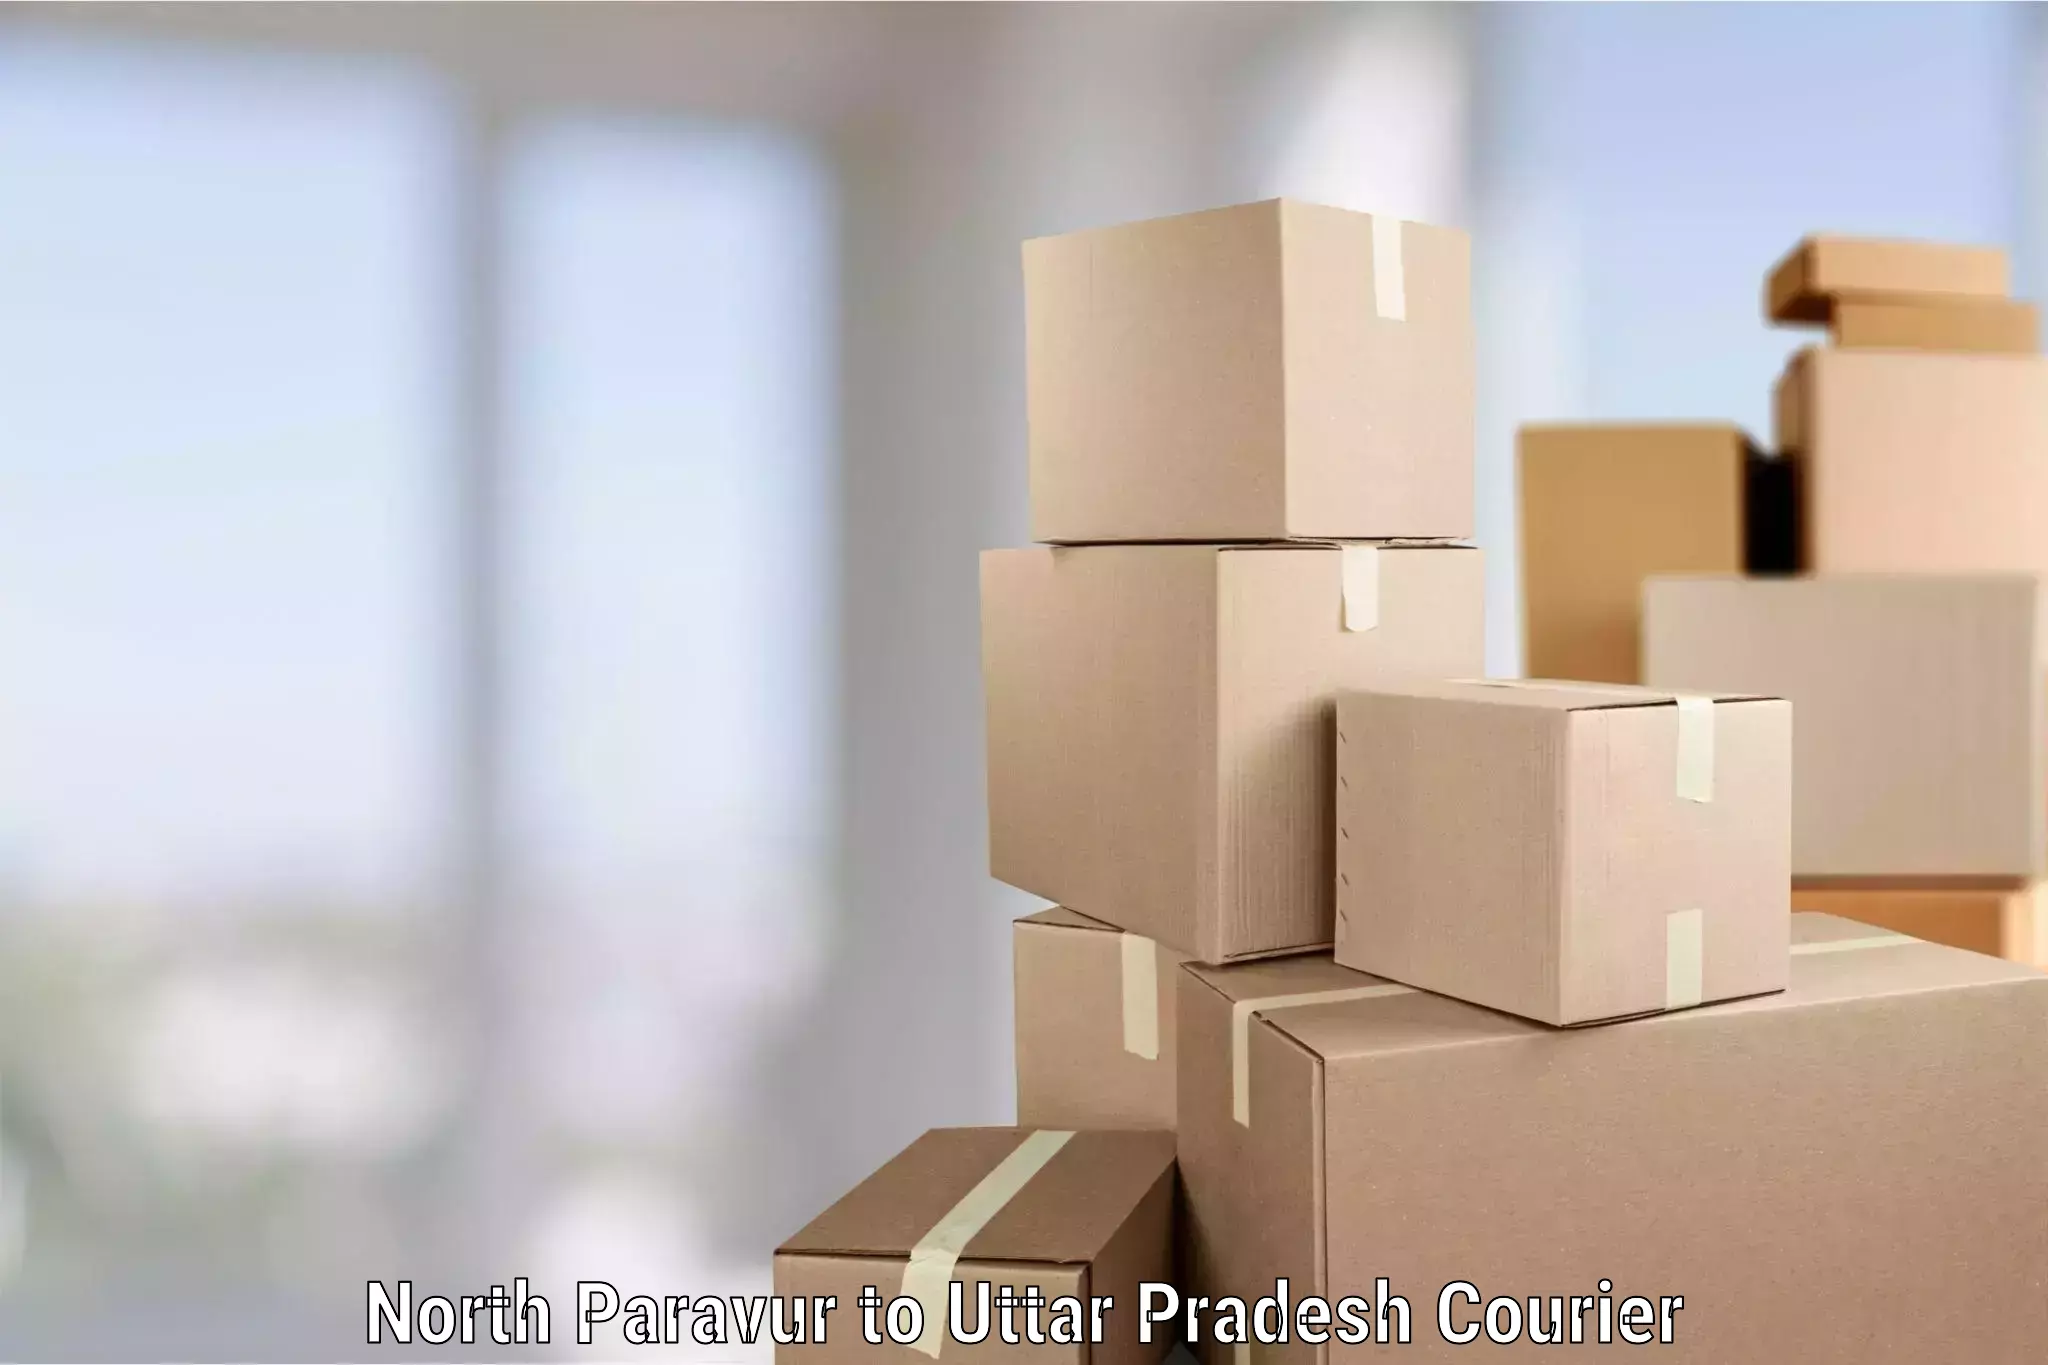 Quality relocation assistance North Paravur to Uttar Pradesh